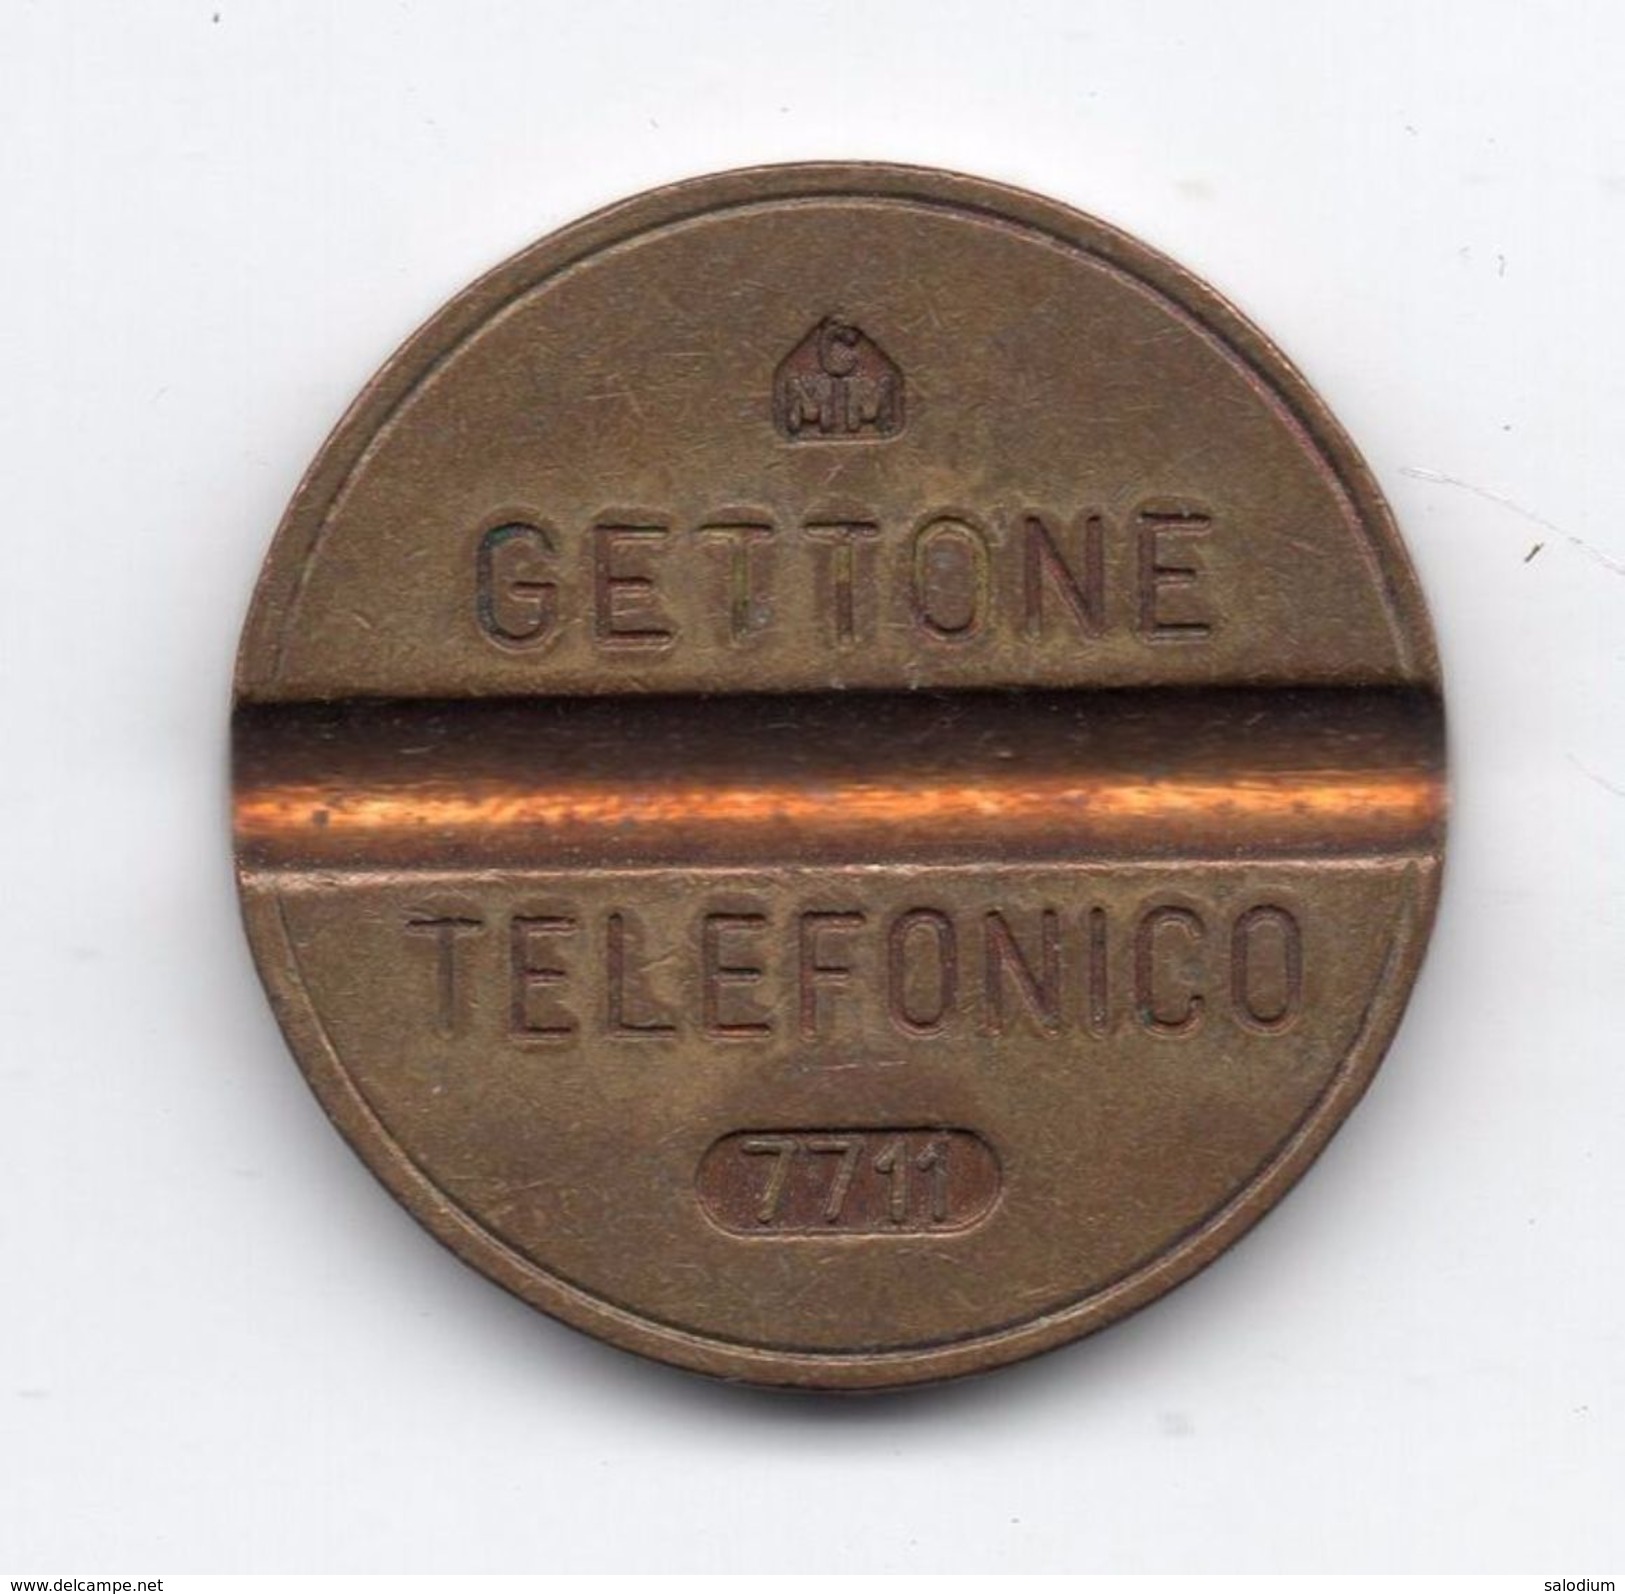 Gettone Telefonico 7711 Token Telephone - (Id-832) - Professionals/Firms